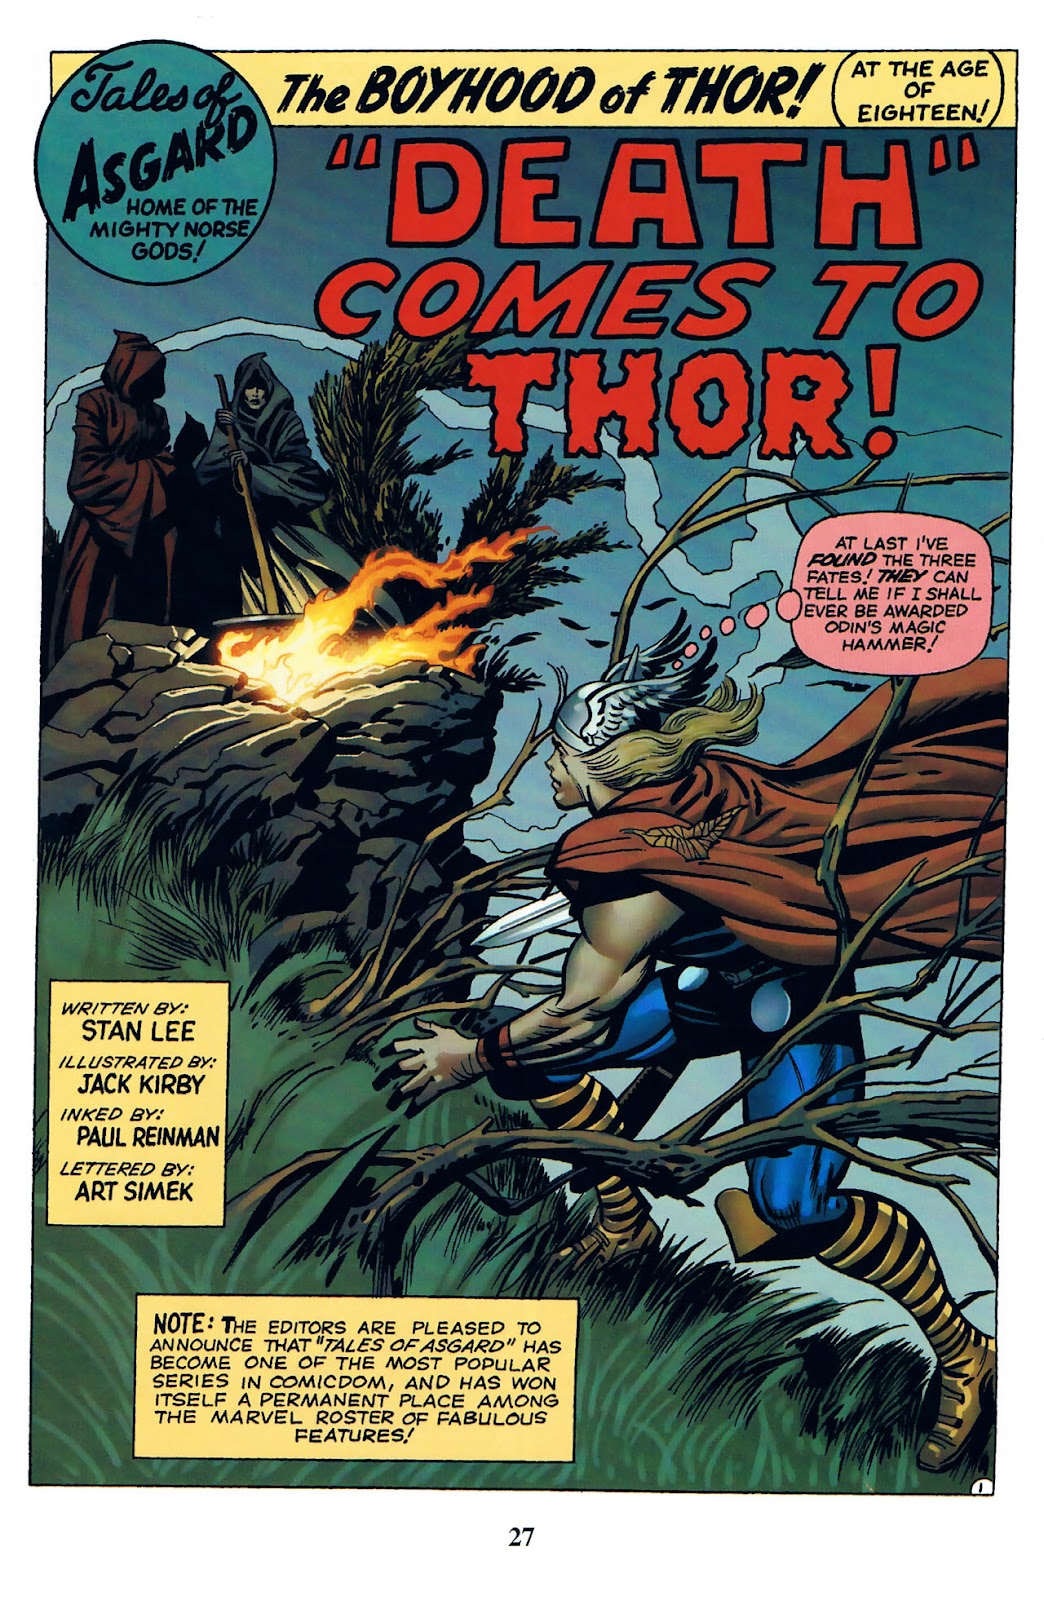 Thor: Tales of Asgard by Stan Lee & Jack Kirby issue 1 - Page 29